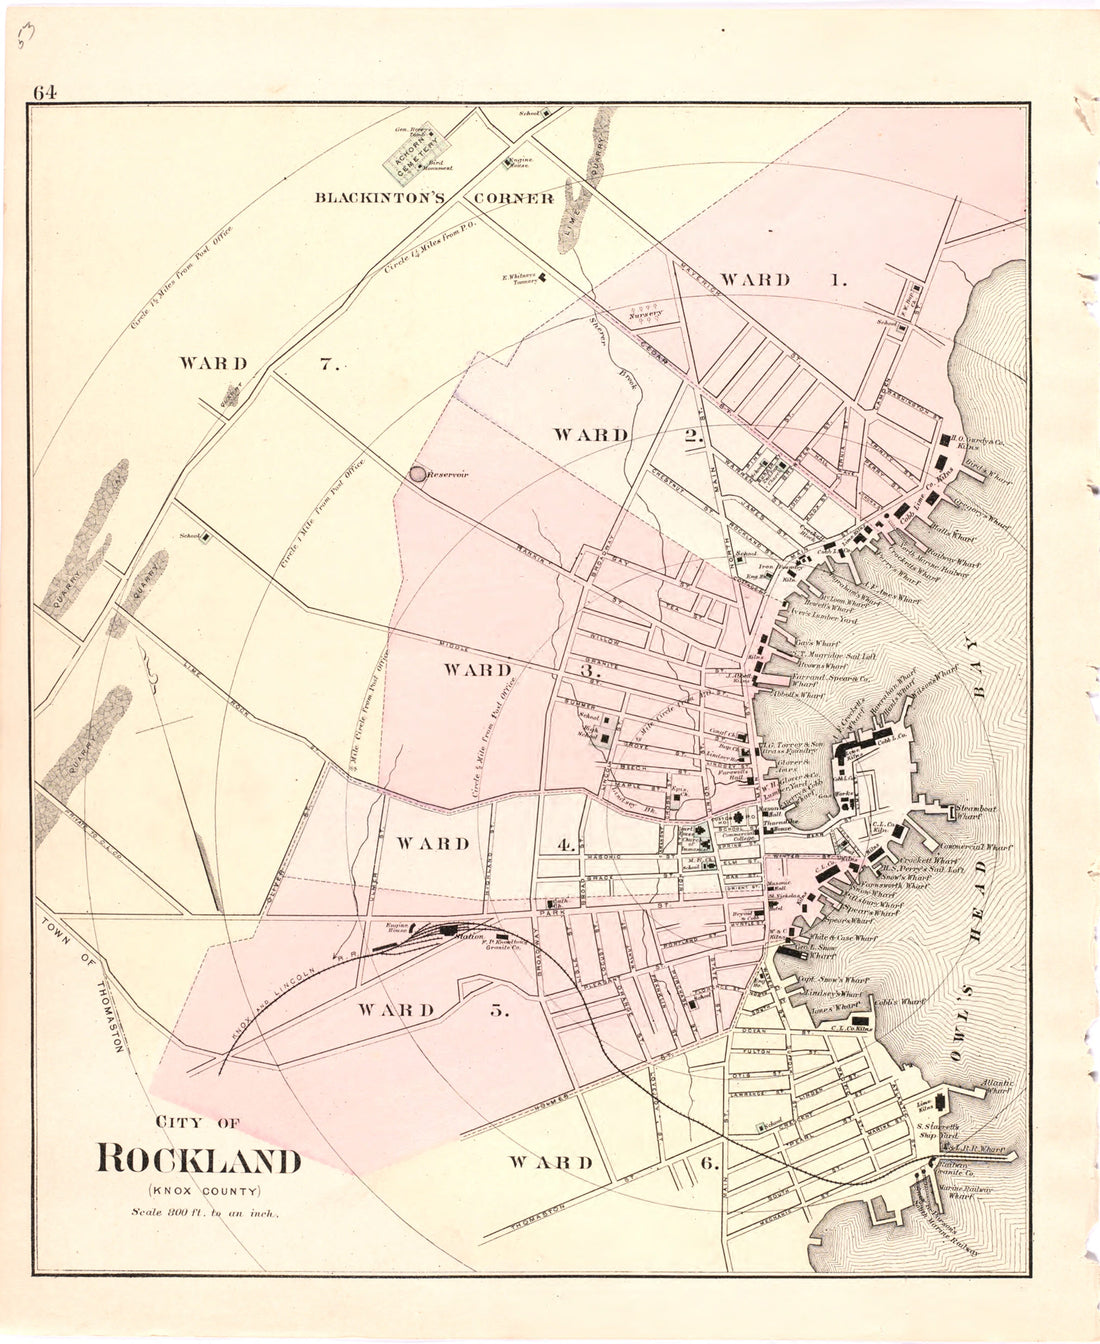 This hand drawn illustration (map) of City of Rockland from Colby&